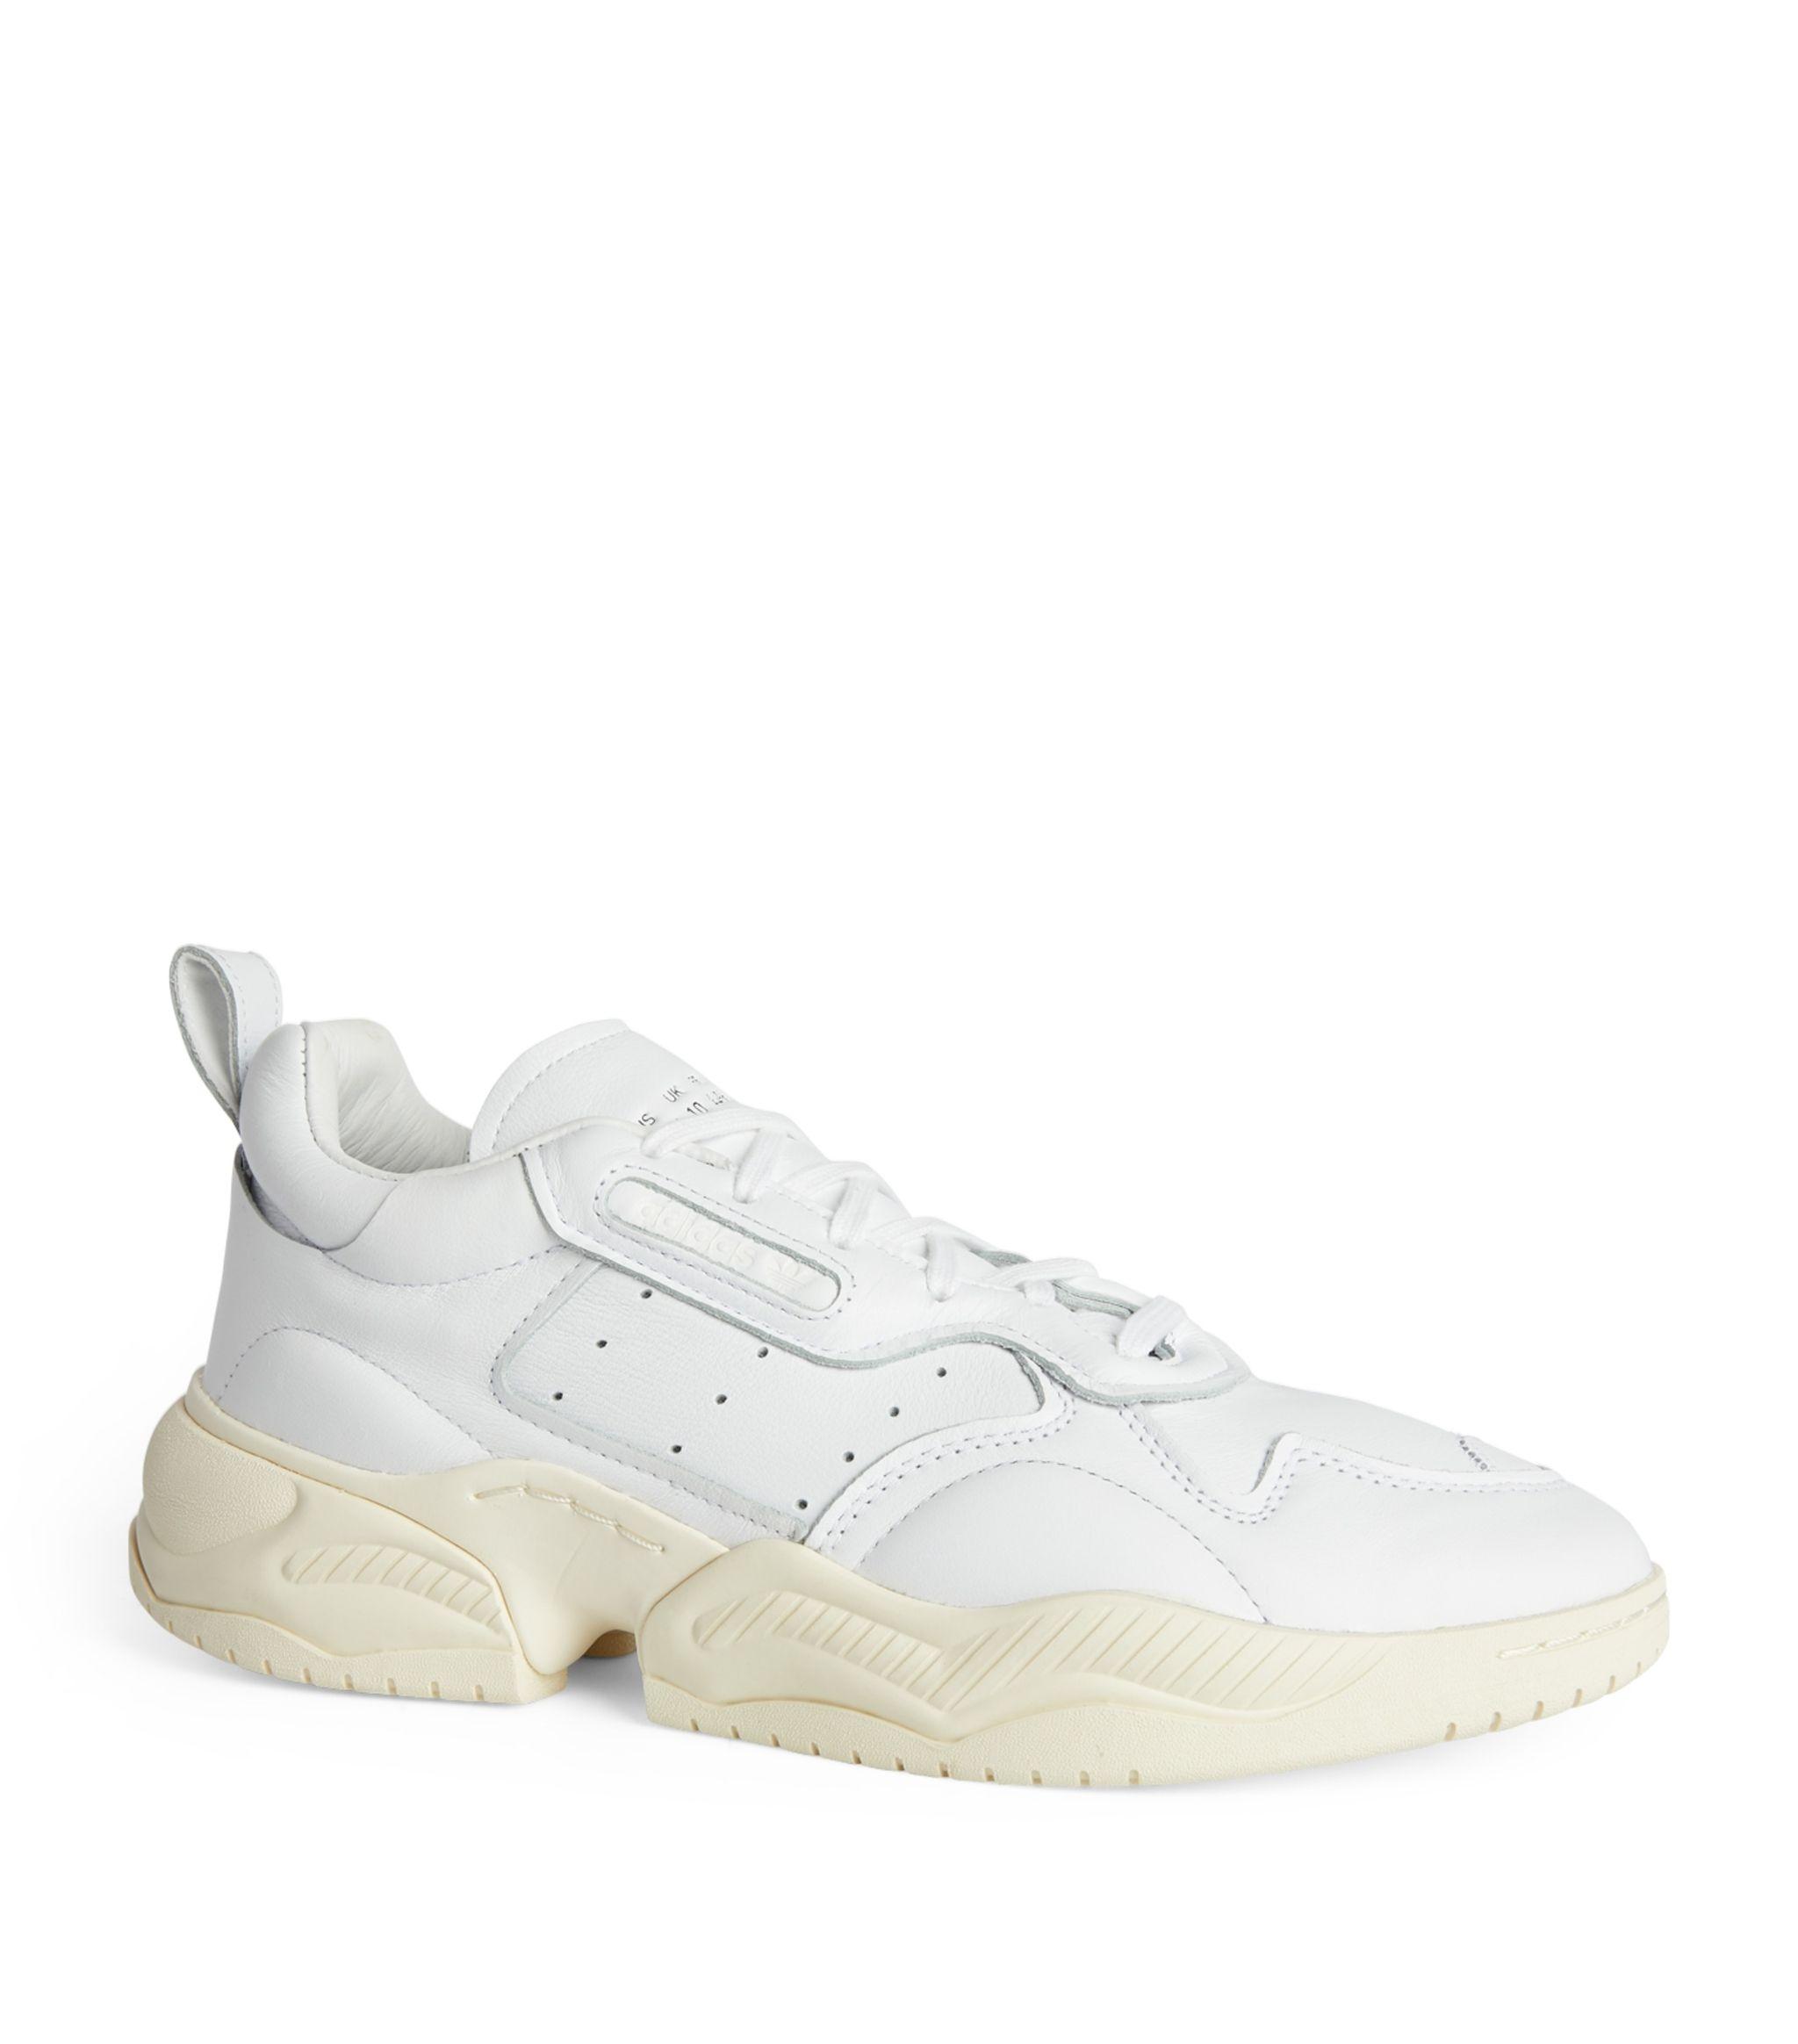 adidas Originals Supercourt Rx Raw White Leather Trainers for Men - Save  60% - Lyst